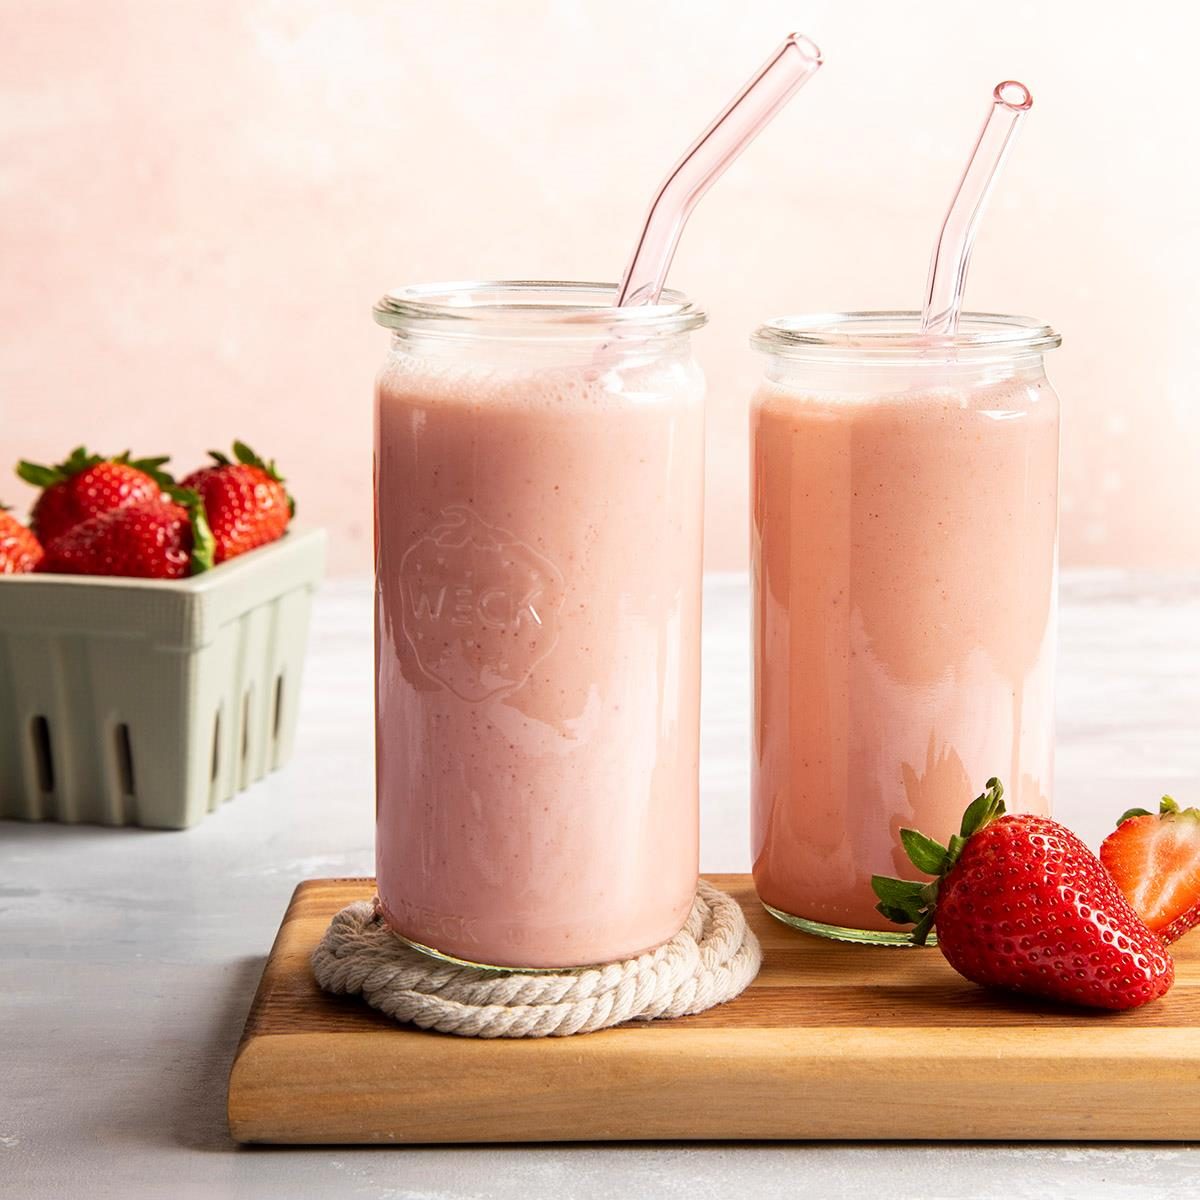 Banana Strawberry Smoothies Exps Ft23 24644 St 3 15 1